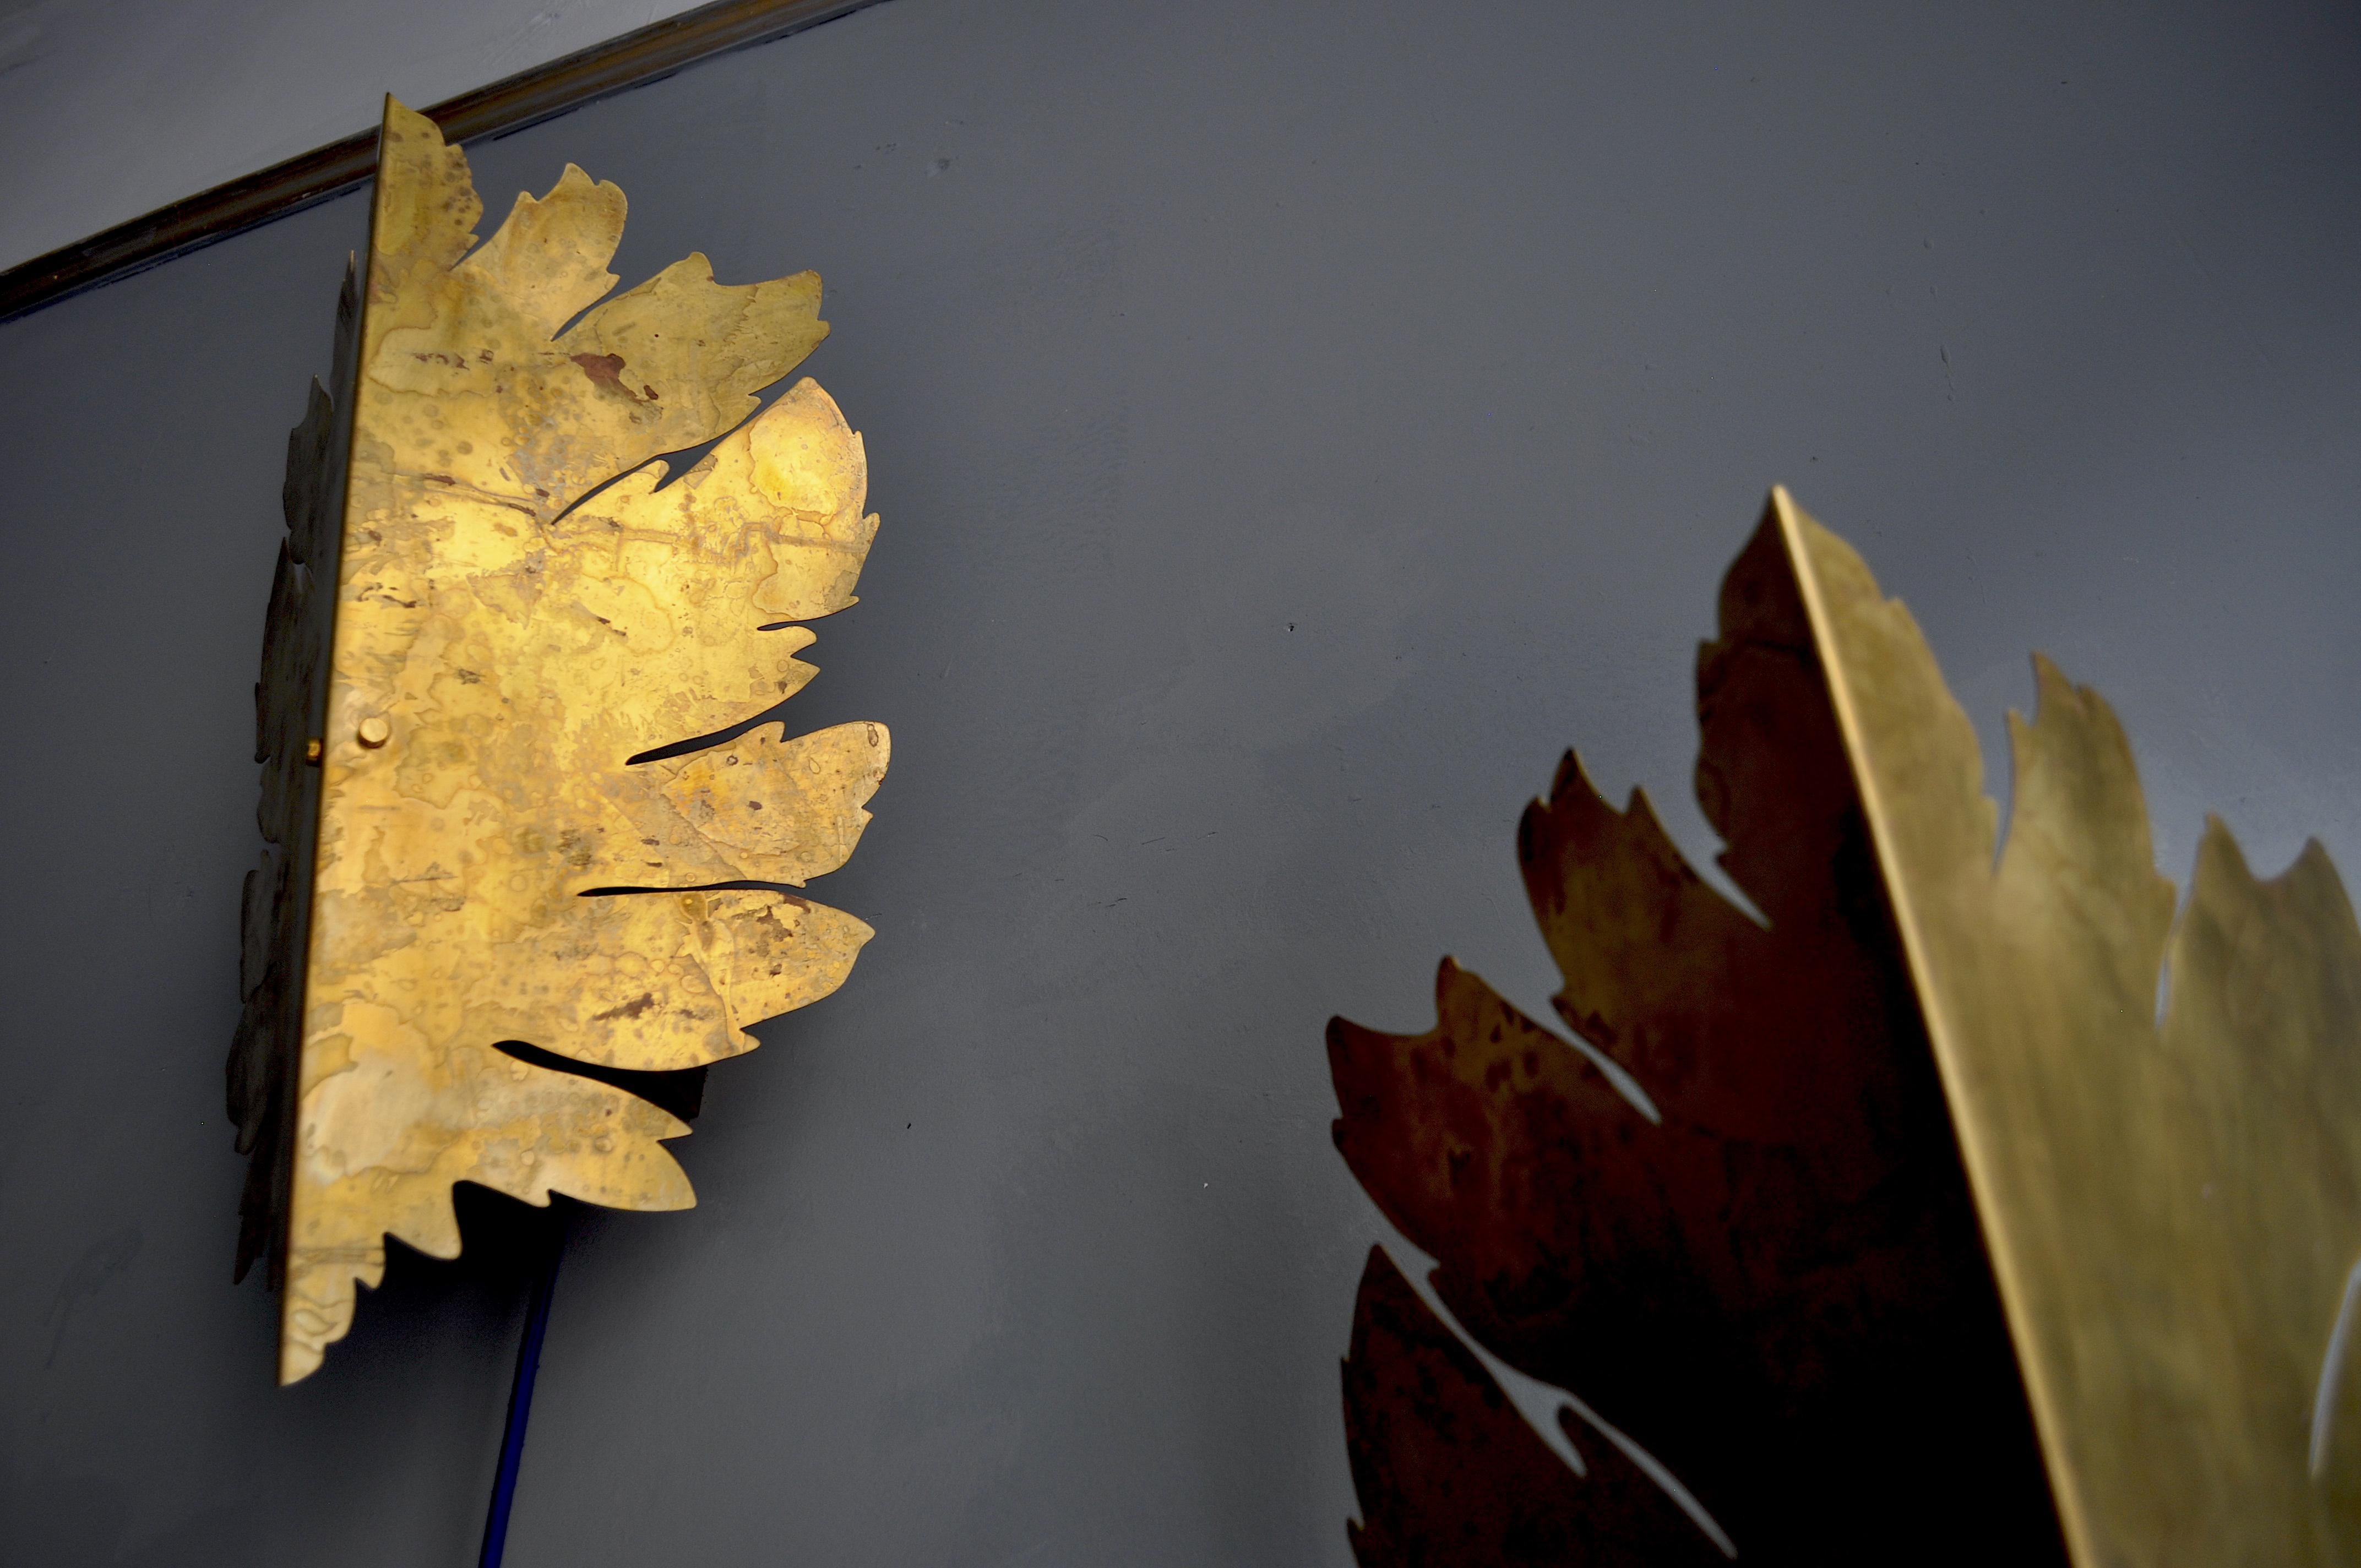 An ancient and classic elegance comes from this wall lamp inspired by the plant world and the golden autumn leaves. The laser-cut screen from a brass plate is finished slightly oxidized with an exquisite antique gold finishing. The junction box and